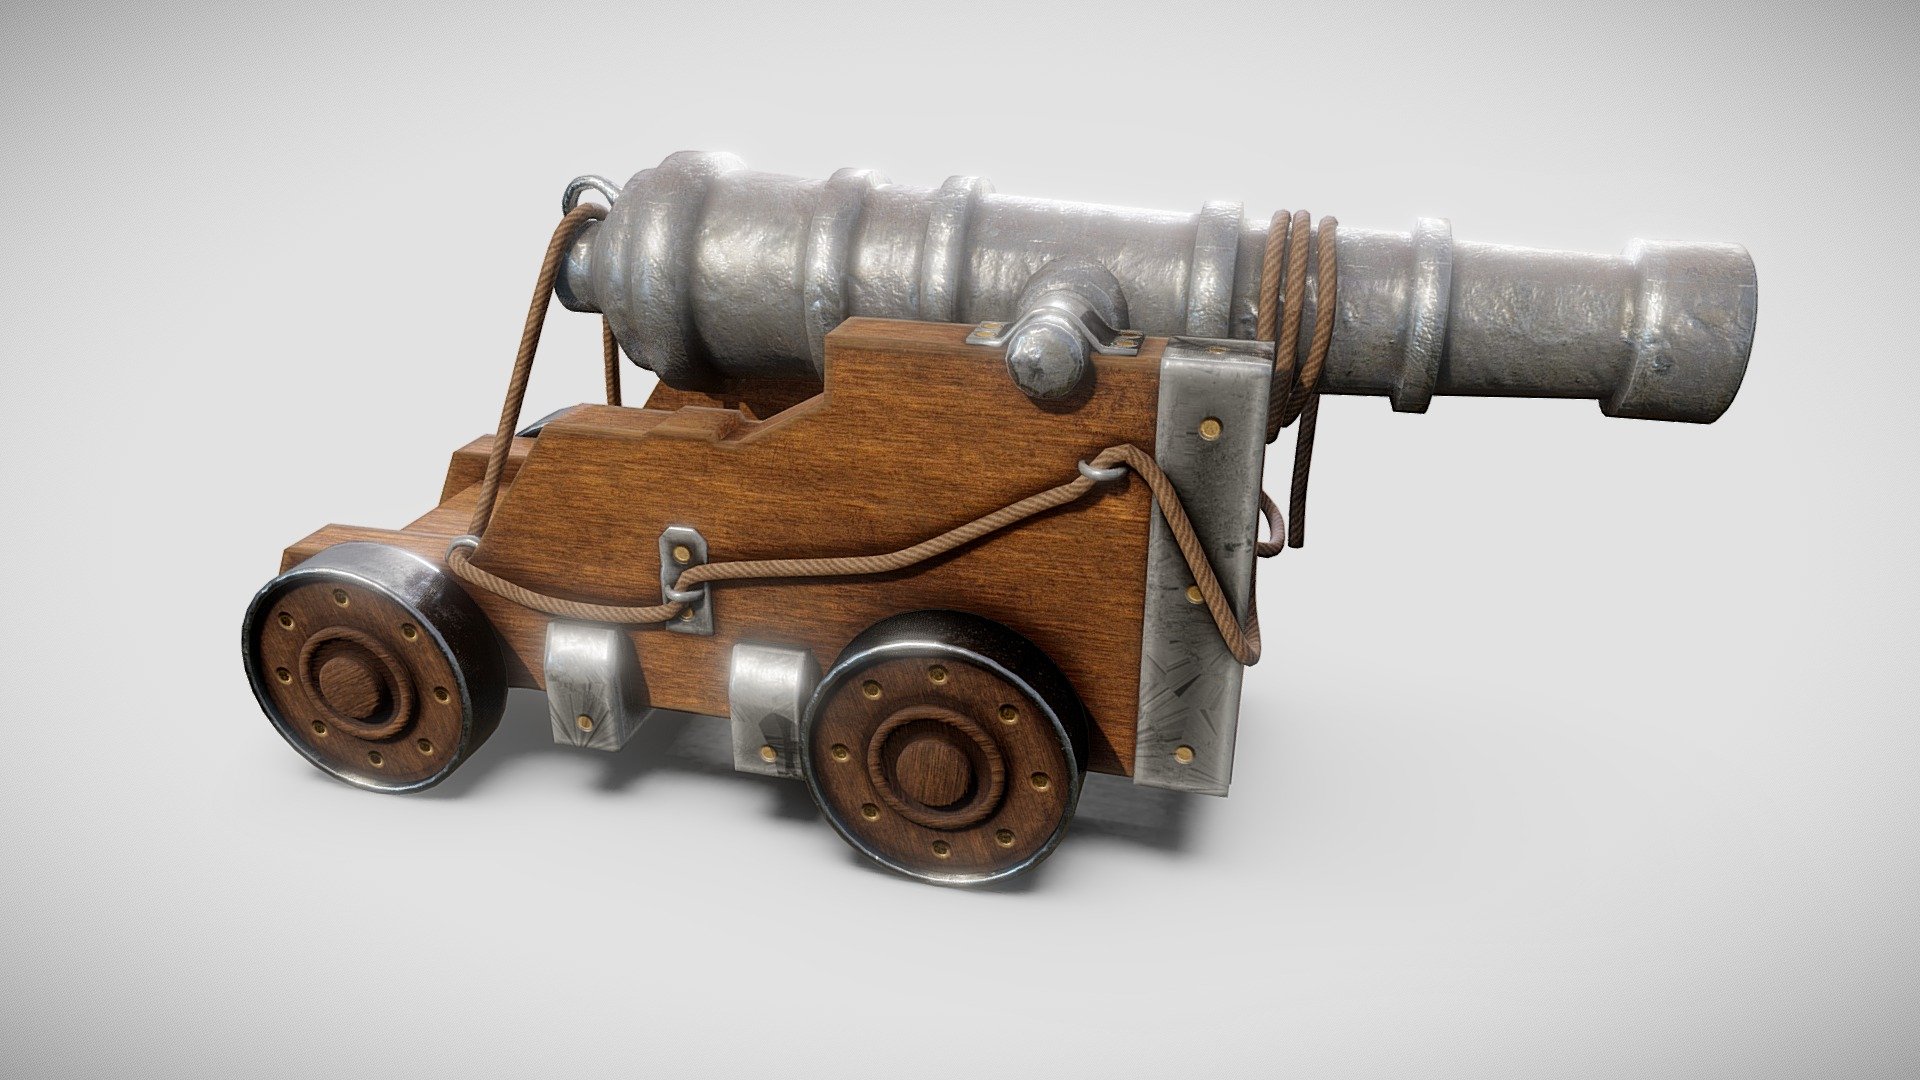 I've really waanted to make a pirate game for a long time, but I dont have the skills or the time to make a complete game. This is the type of cannon that you might find on one of said pirate ships.

My First attempt at rope, and I think it turned out very well.

Unfortunately som eof the textures seemed to bug our when imported to sketchfab 3d model